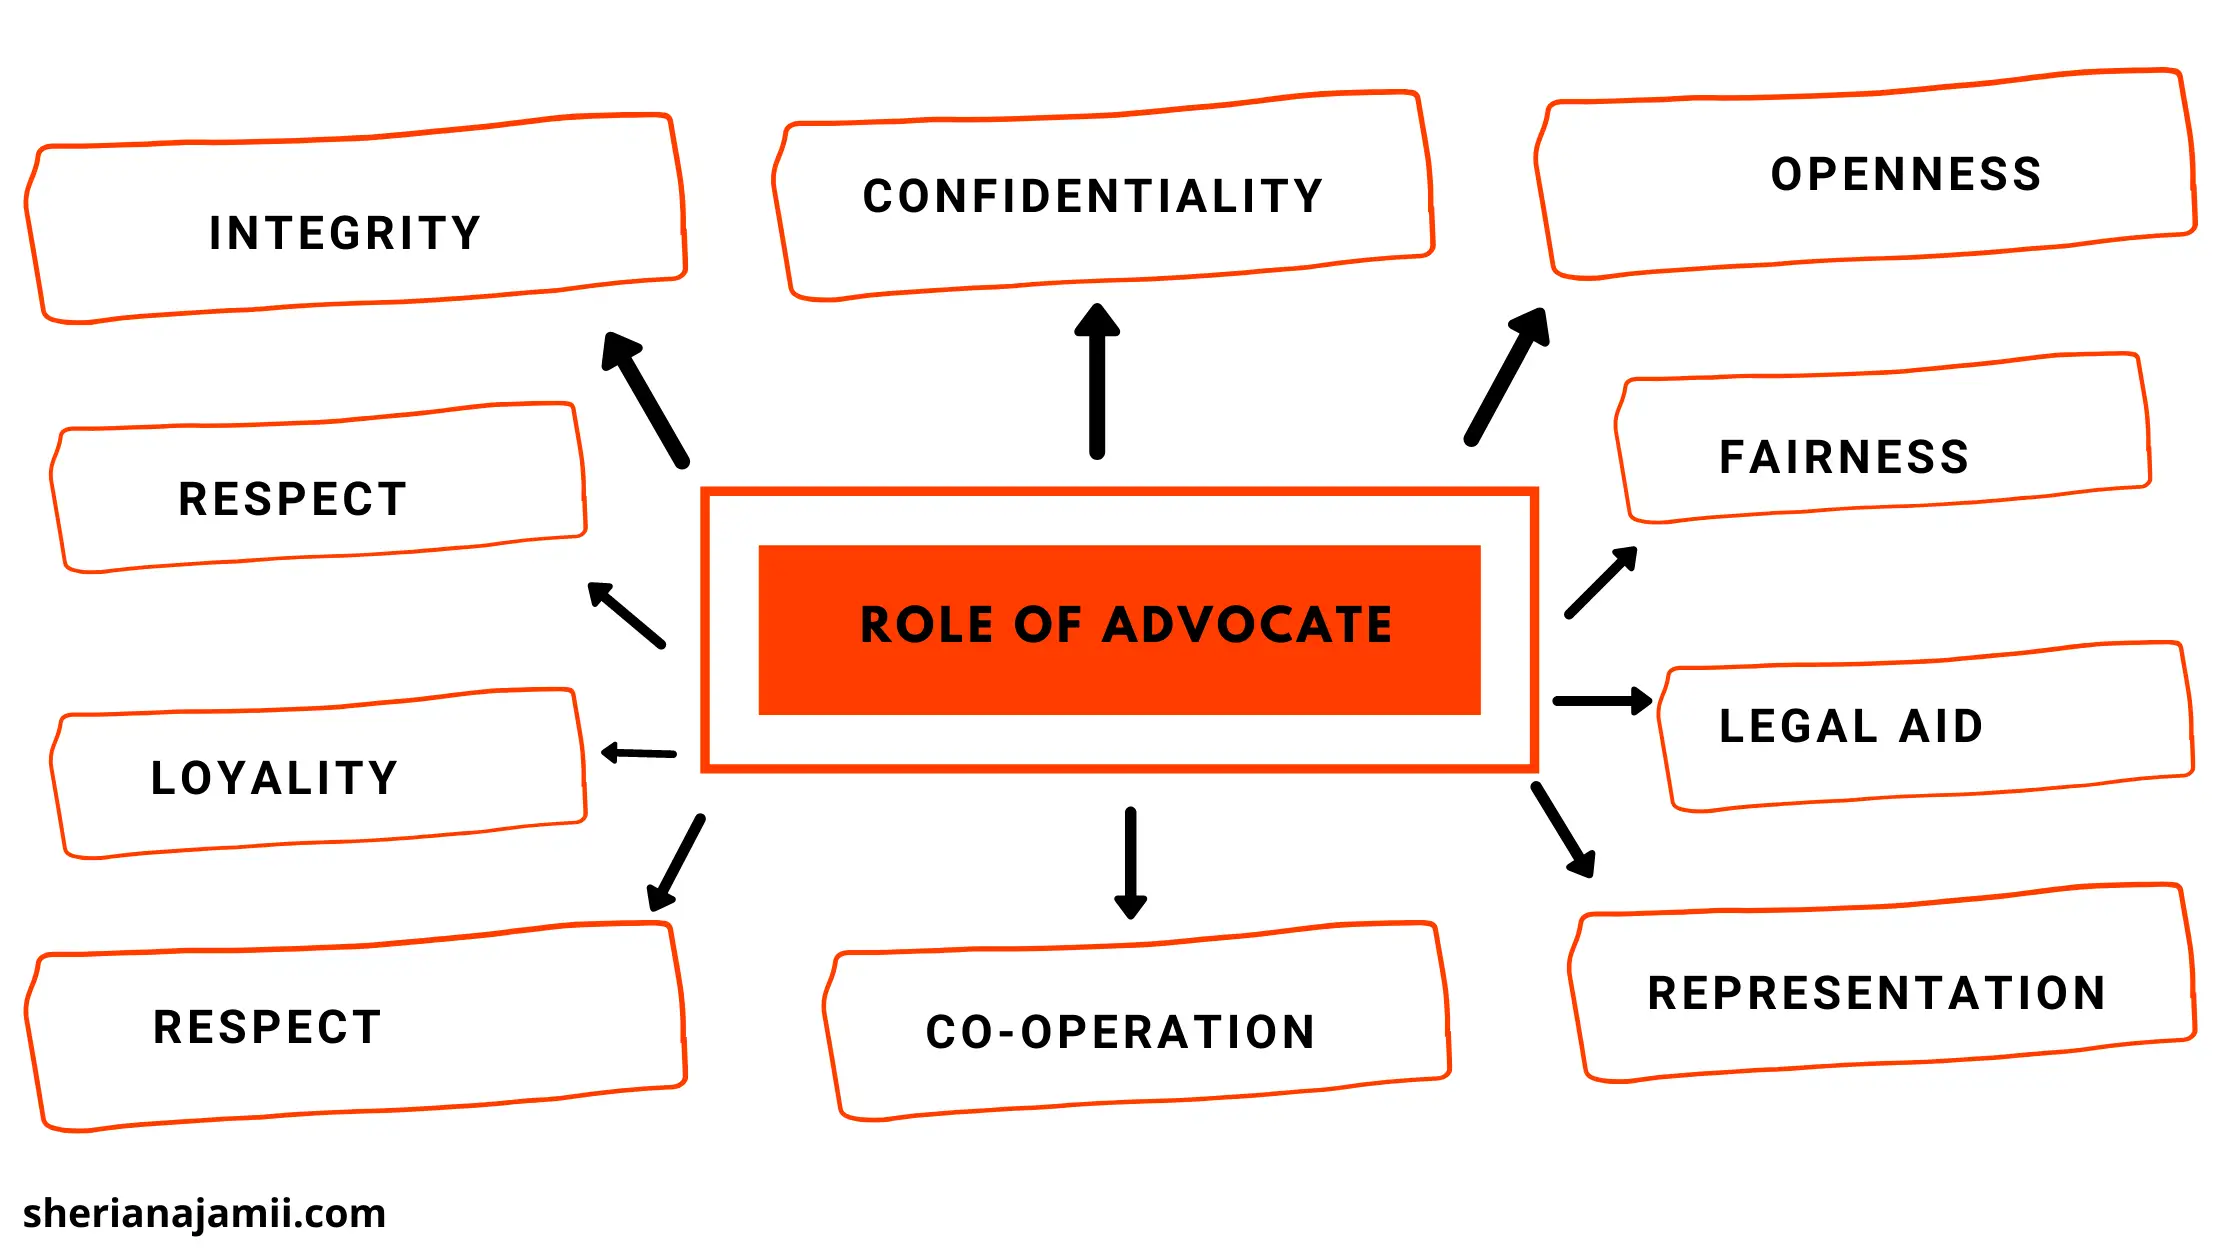 Roles of Advocate, role of advocates, duties of advocates,